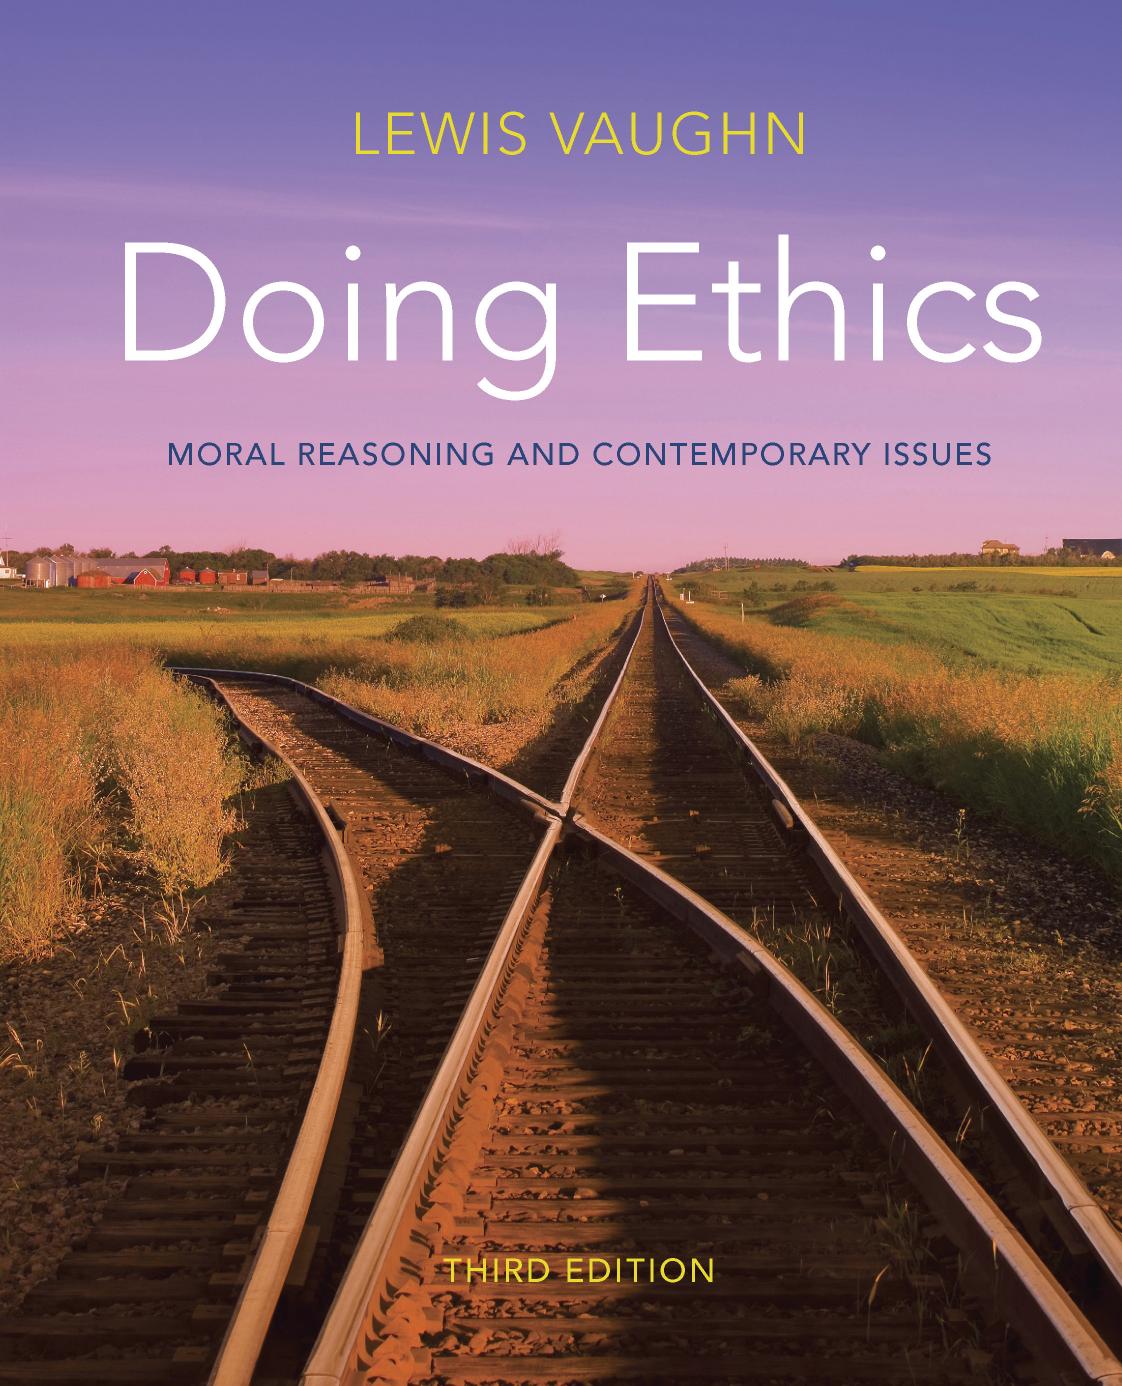 Doing Ethics Moral Reasoning and Contemporary Issues 3rd Edition.jpg